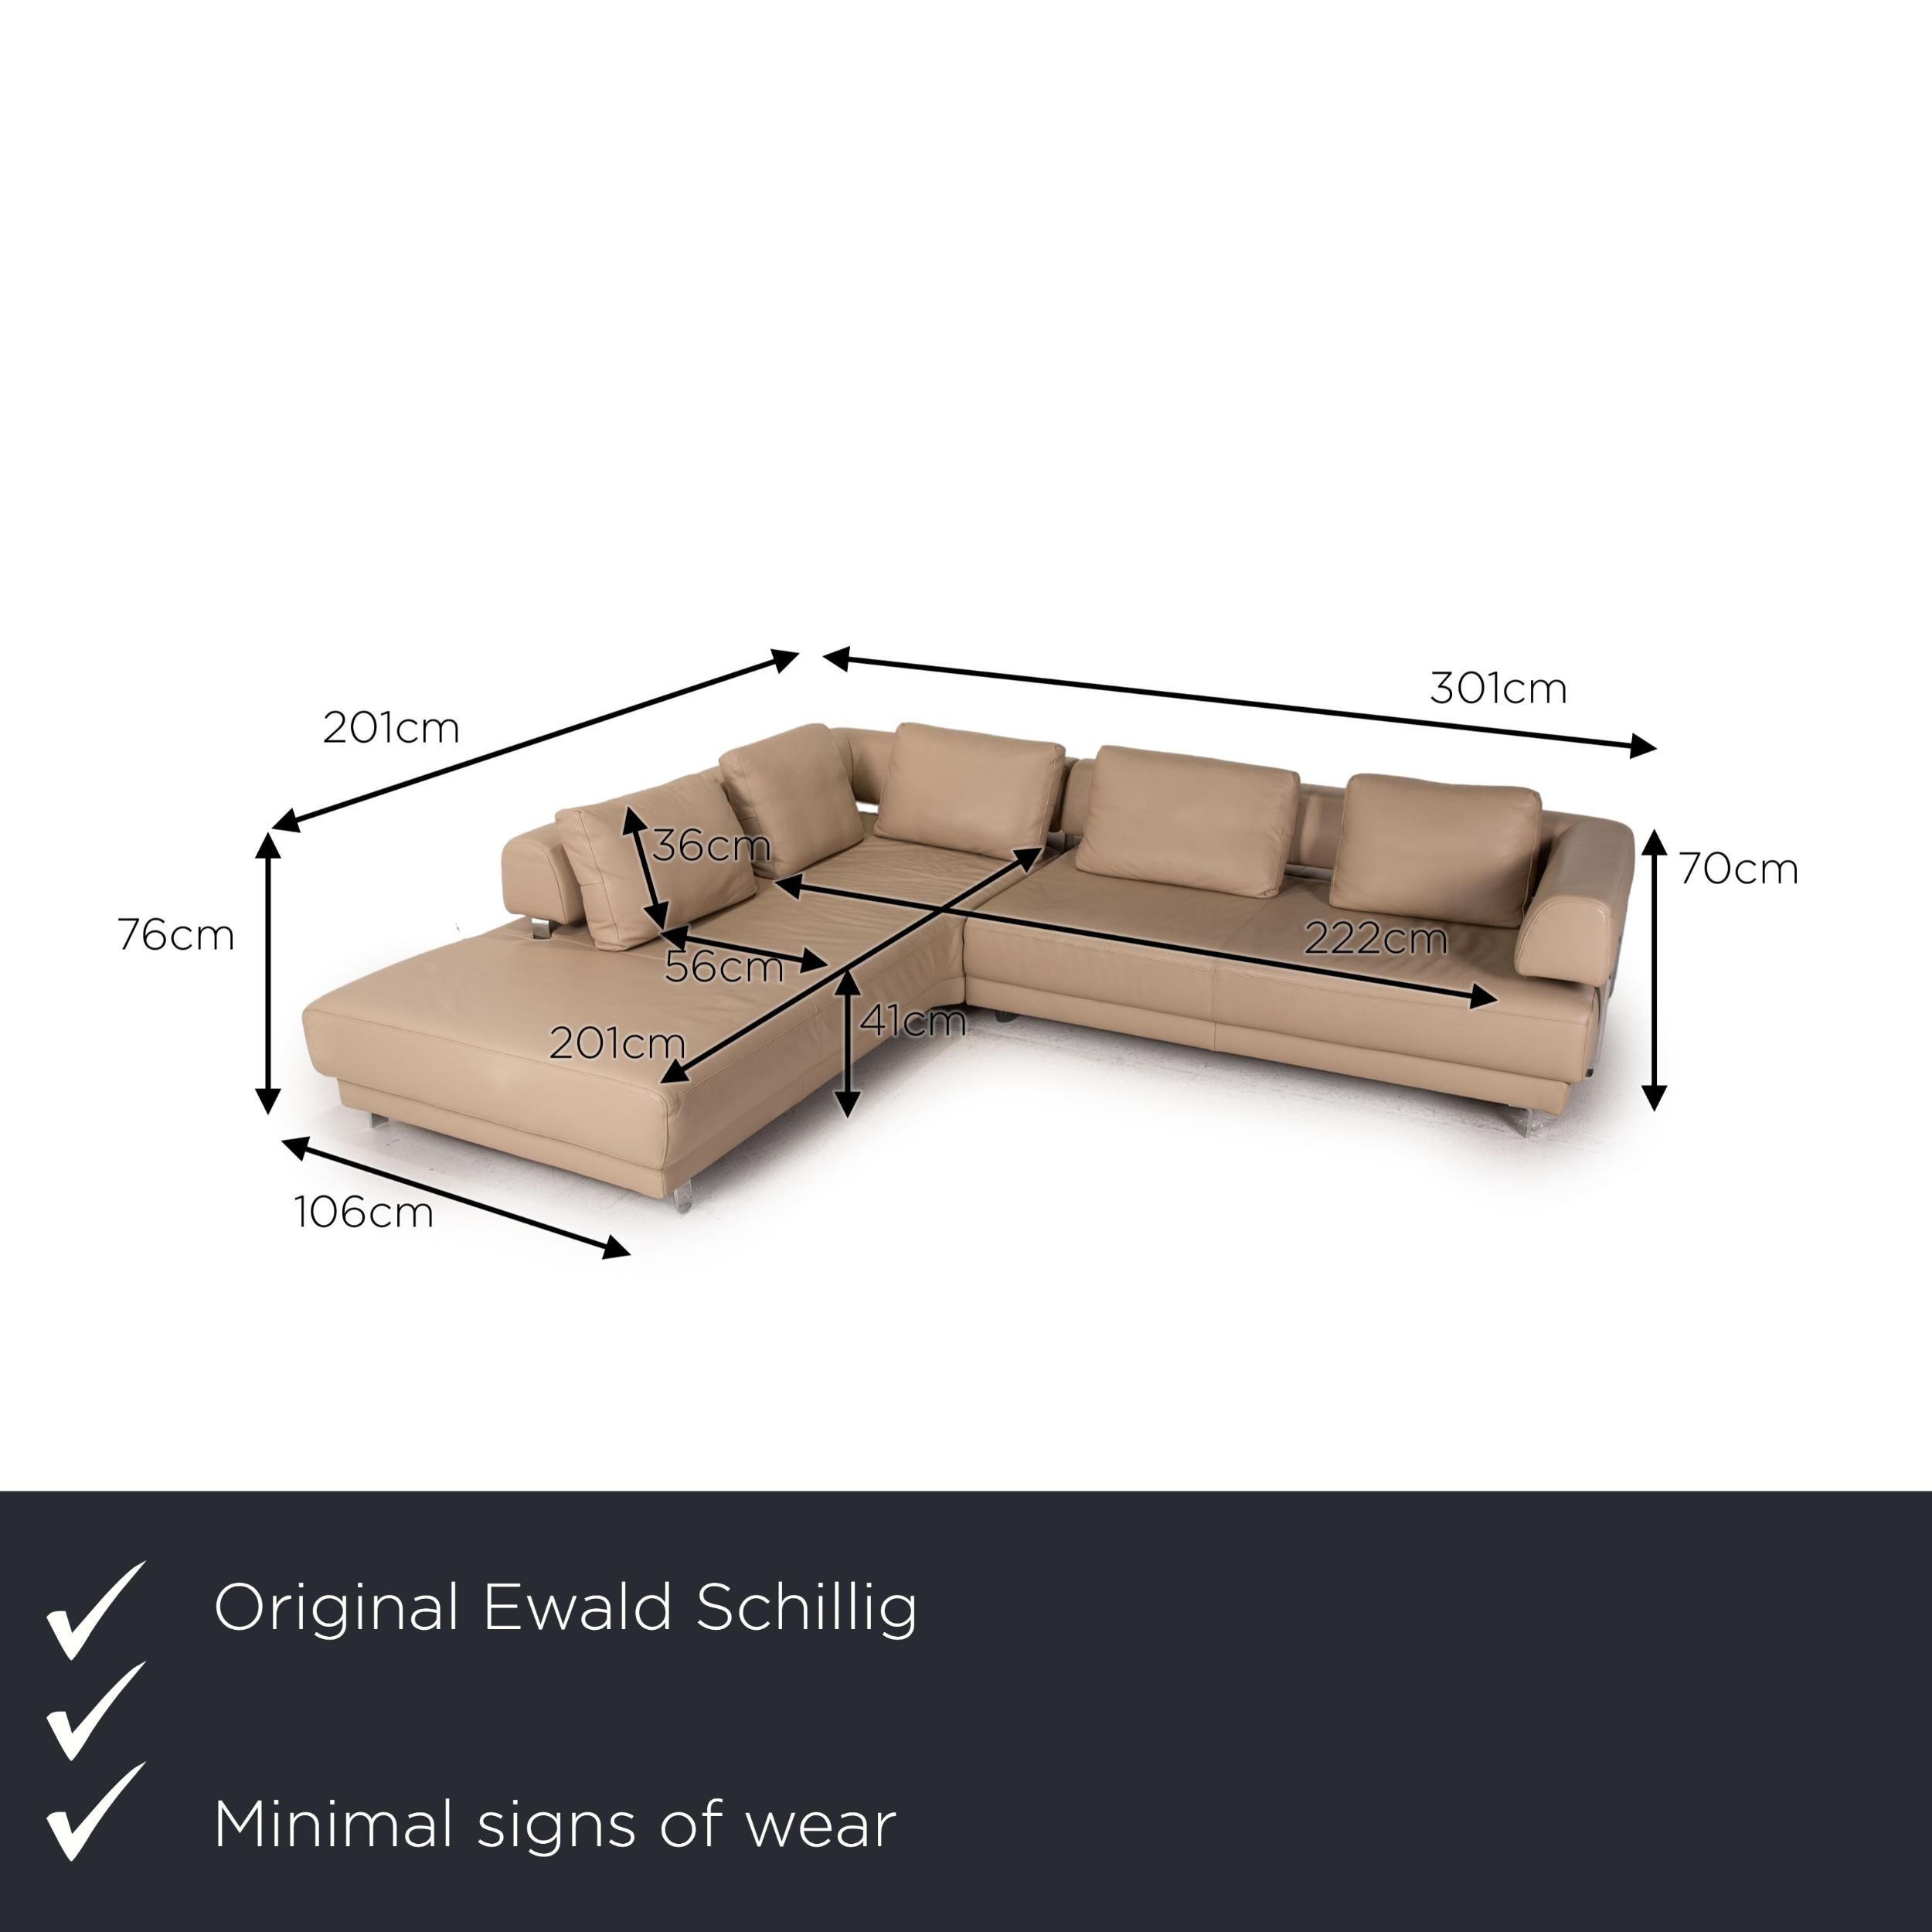 We present to you an Ewald Schillig Brand Face leather sofa beige corner sofa couch.
  
 

 Product measurements in centimeters:
 

 depth: 106
 width: 201
 height: 76
 seat height: 41
 rest height: 70
 seat depth: 56
 seat width: 201
